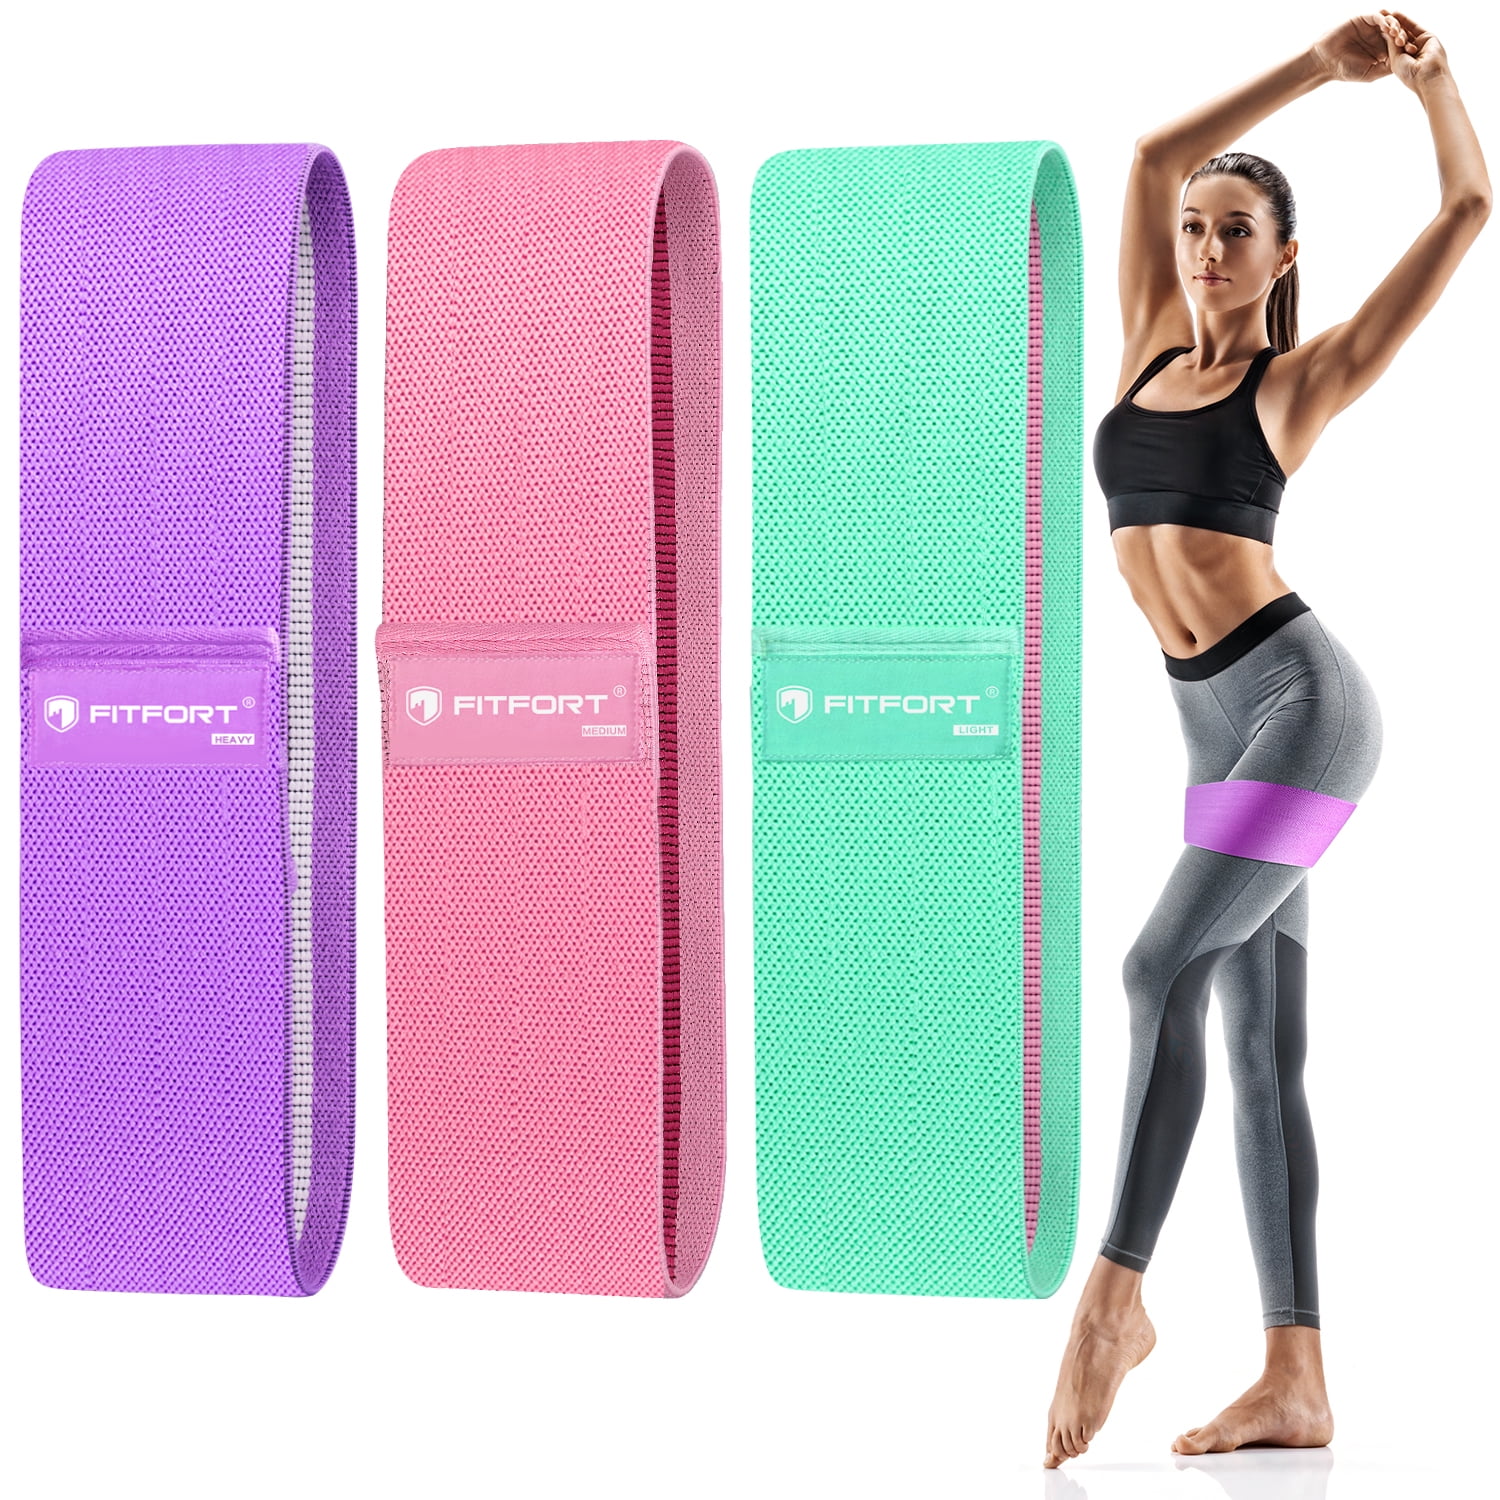 Fabric Resistance Bands Loop Set of 3 Exercise Workout Fitness Yoga Booty Band 